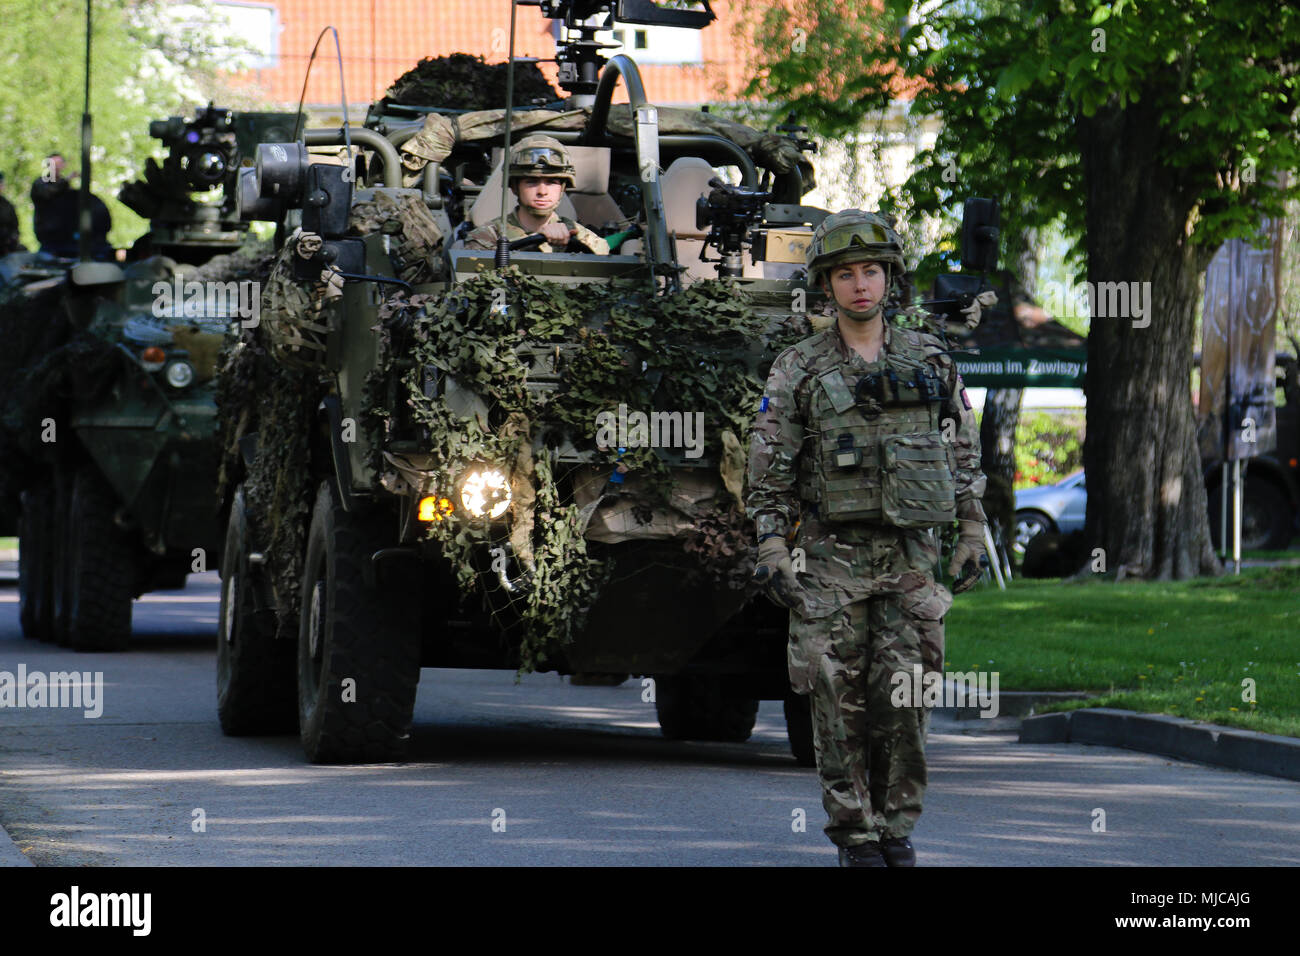 U.K. Capt. Alice Williams (right), a troop leader with the 1st The Queen's Dragoon Guards, leads a convoy of military vehicles during a bridge opening ceremony in Giżycko, Poland, May 1, 2018. The ceremony was held between the town of Giżycko and the Soldiers of Battle Group Poland: a unique, multinational coalition of U.S., U.K., Croatian and Romanian soldiers who serve with the Polish 15th Mechanized Brigade as a deterrence force in support of NATO’s Enhanced Forward Presence. (U.S. Army photo by Spc. Hubert D. Delany III /22nd Mobile Public Affairs Detachment) Stock Photo